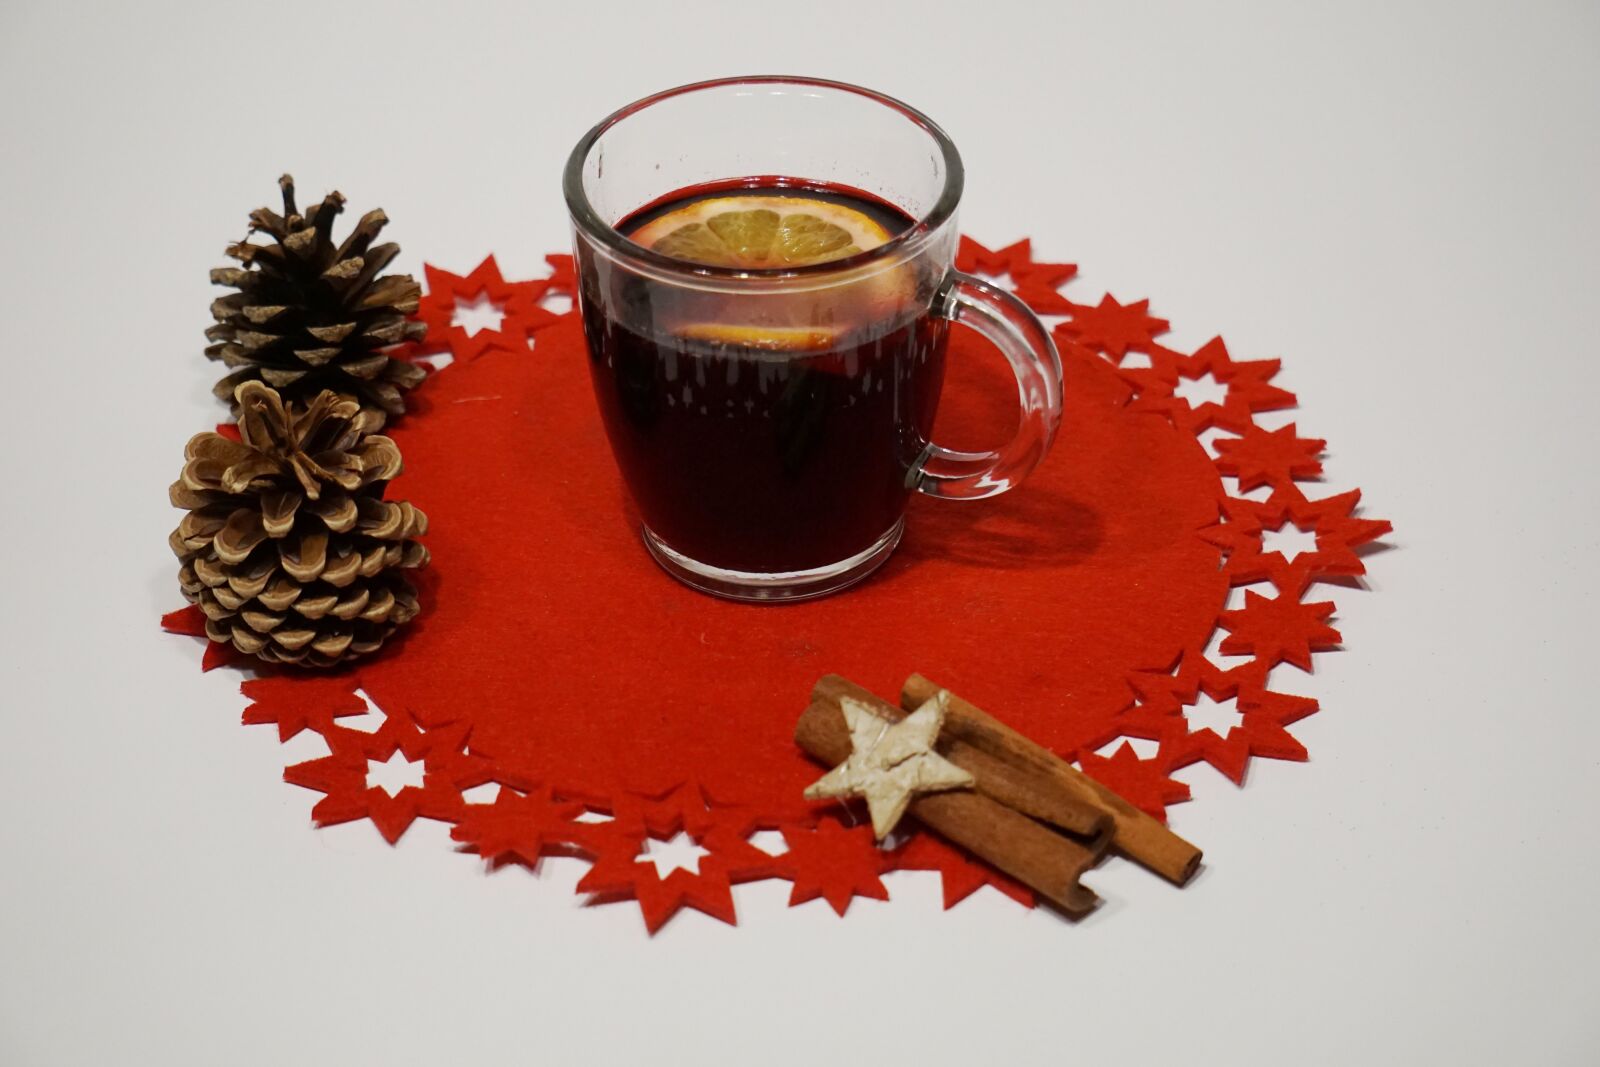 Sony a6000 sample photo. Advent, mulled claret, christmas photography